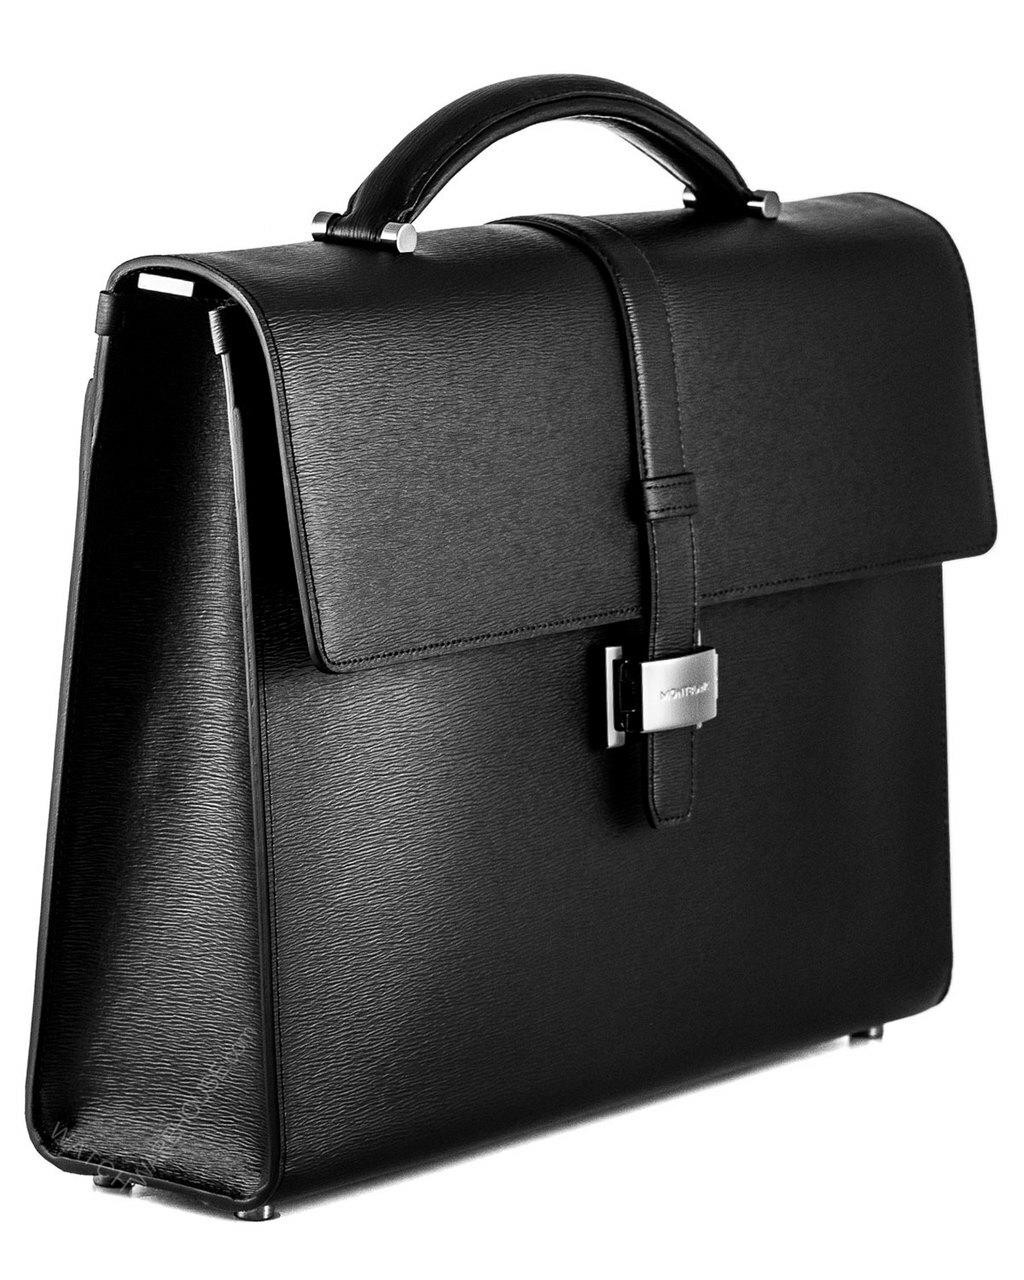 MONTBLANC Vintage Leather Luggage - clothing & accessories - by owner -  apparel sale - craigslist